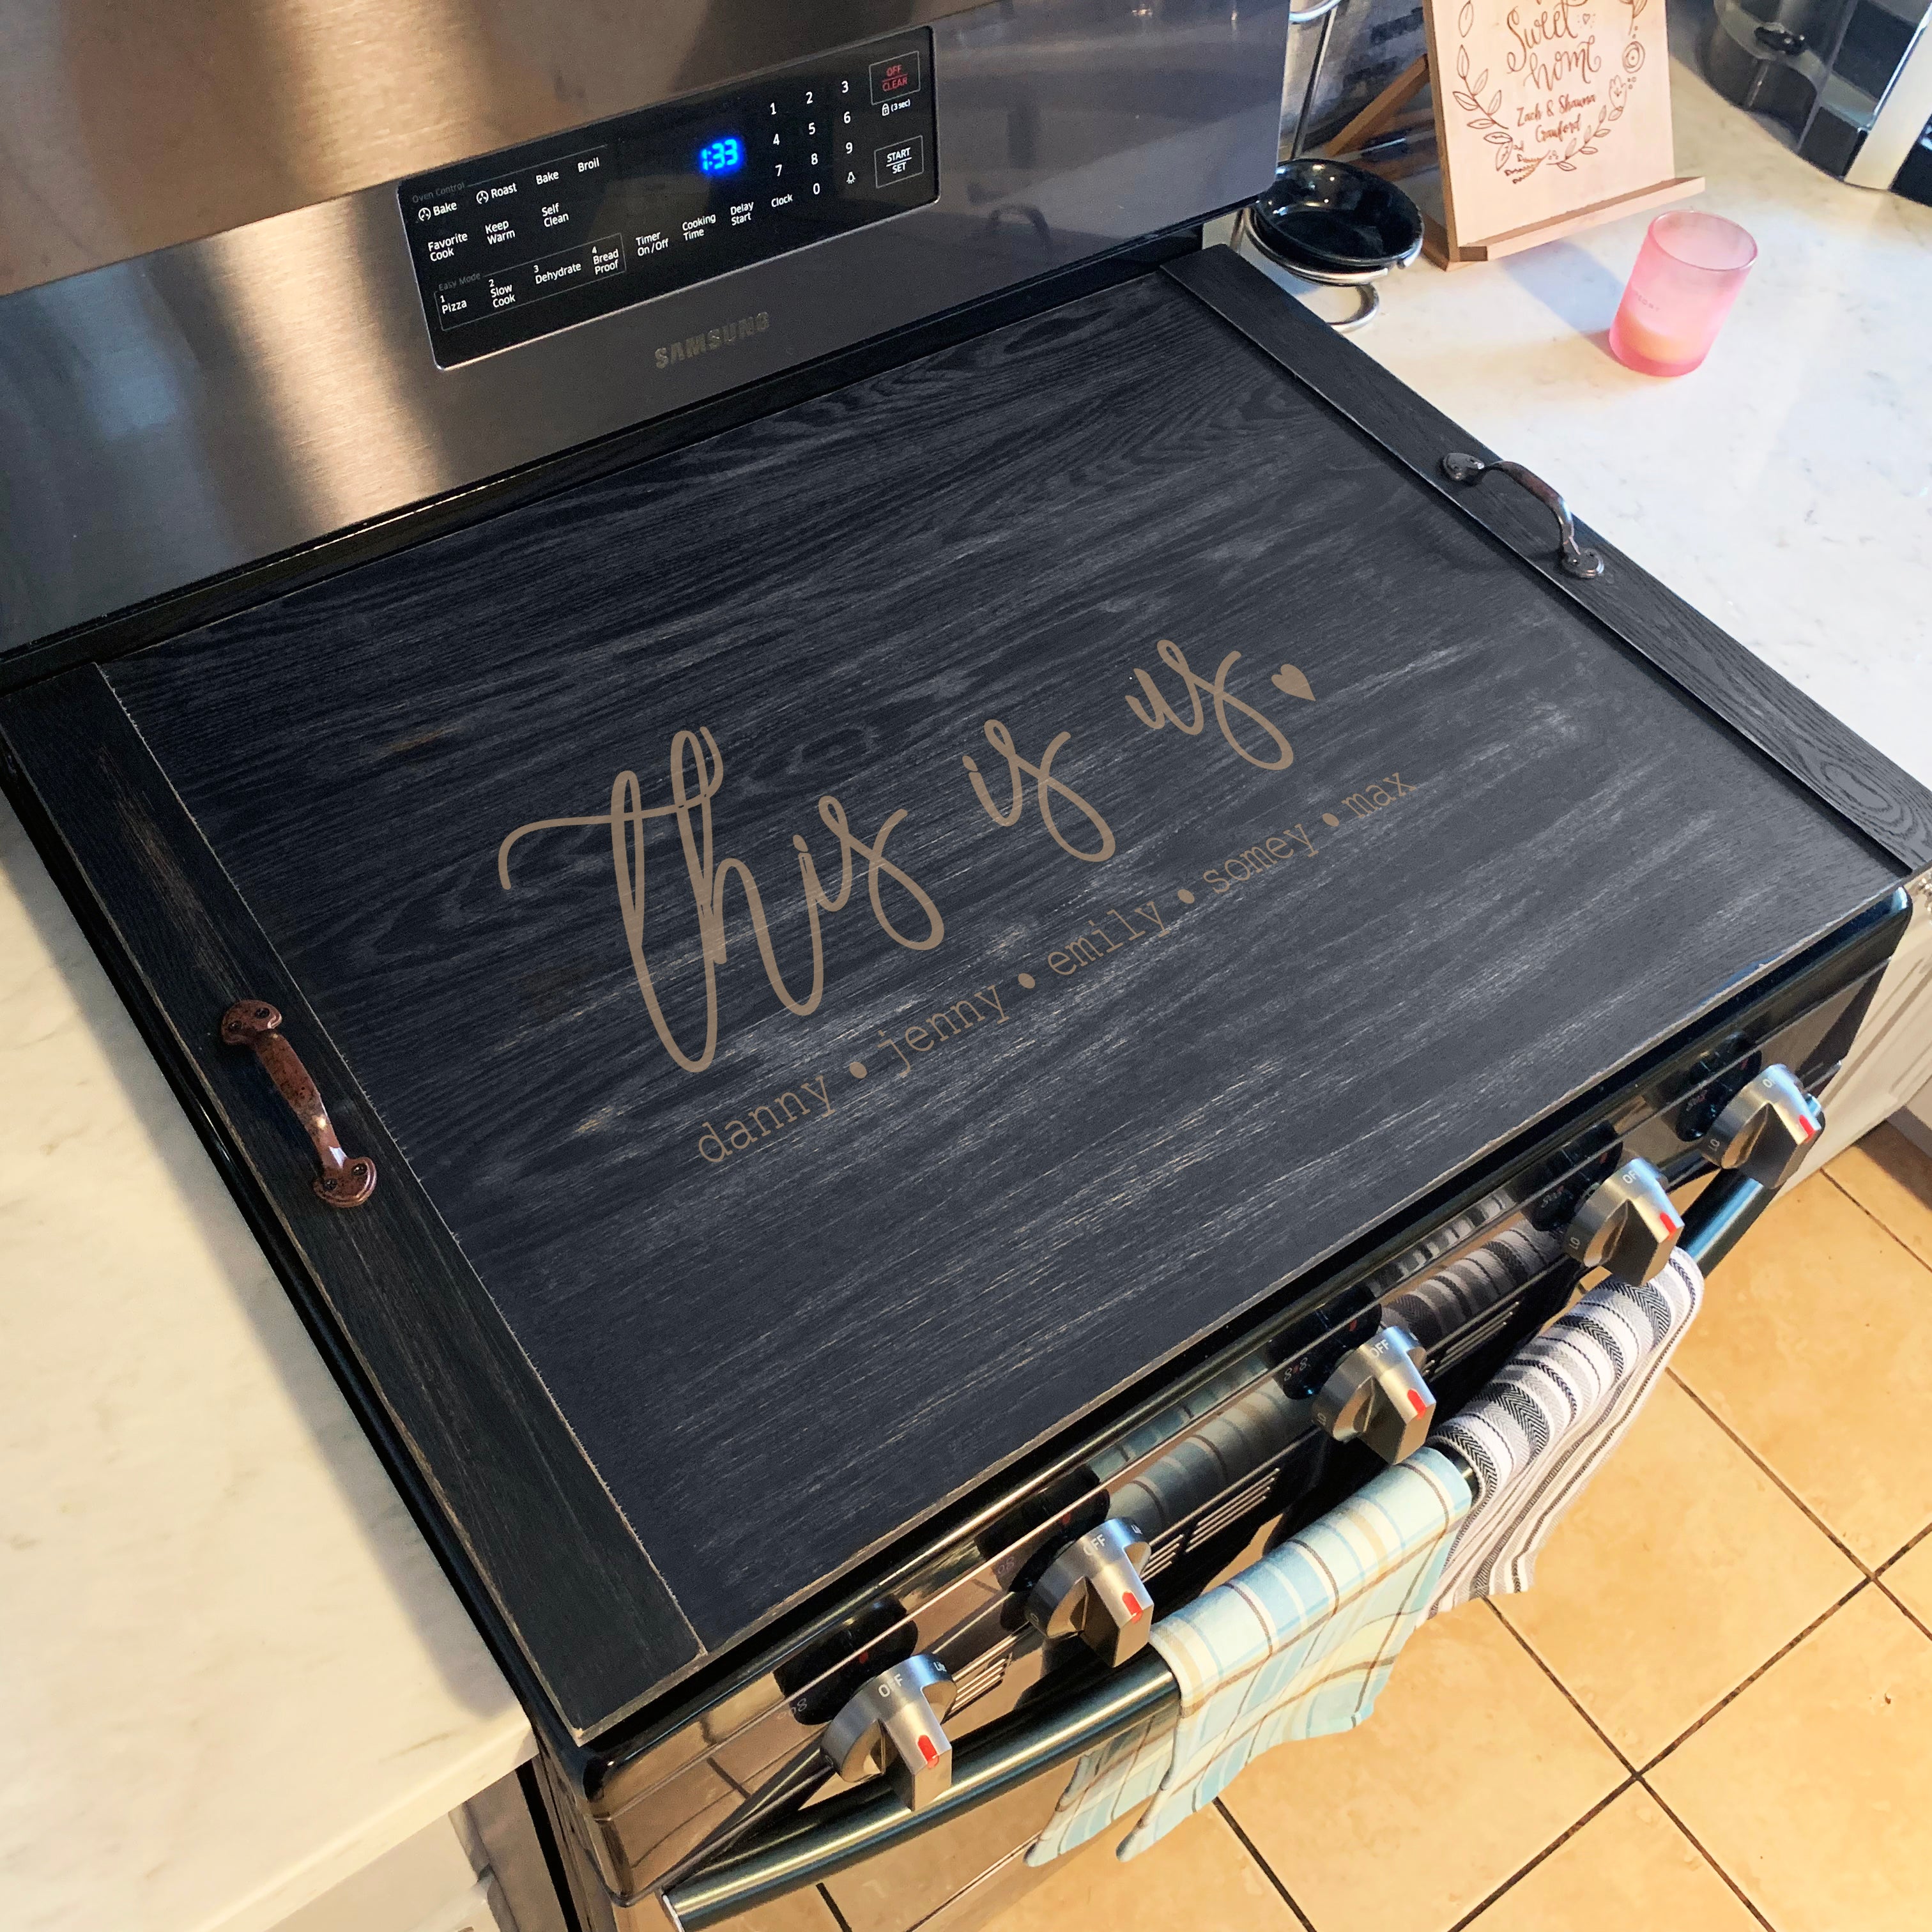  J Thomas Home Alder Wood Stove Top Cover. Engraved Noodle  board. Personalized Gift for Wedding, Father's Day, Birthday, Anniversary.  Electric Gas Stove Top Cover. : Handmade Products